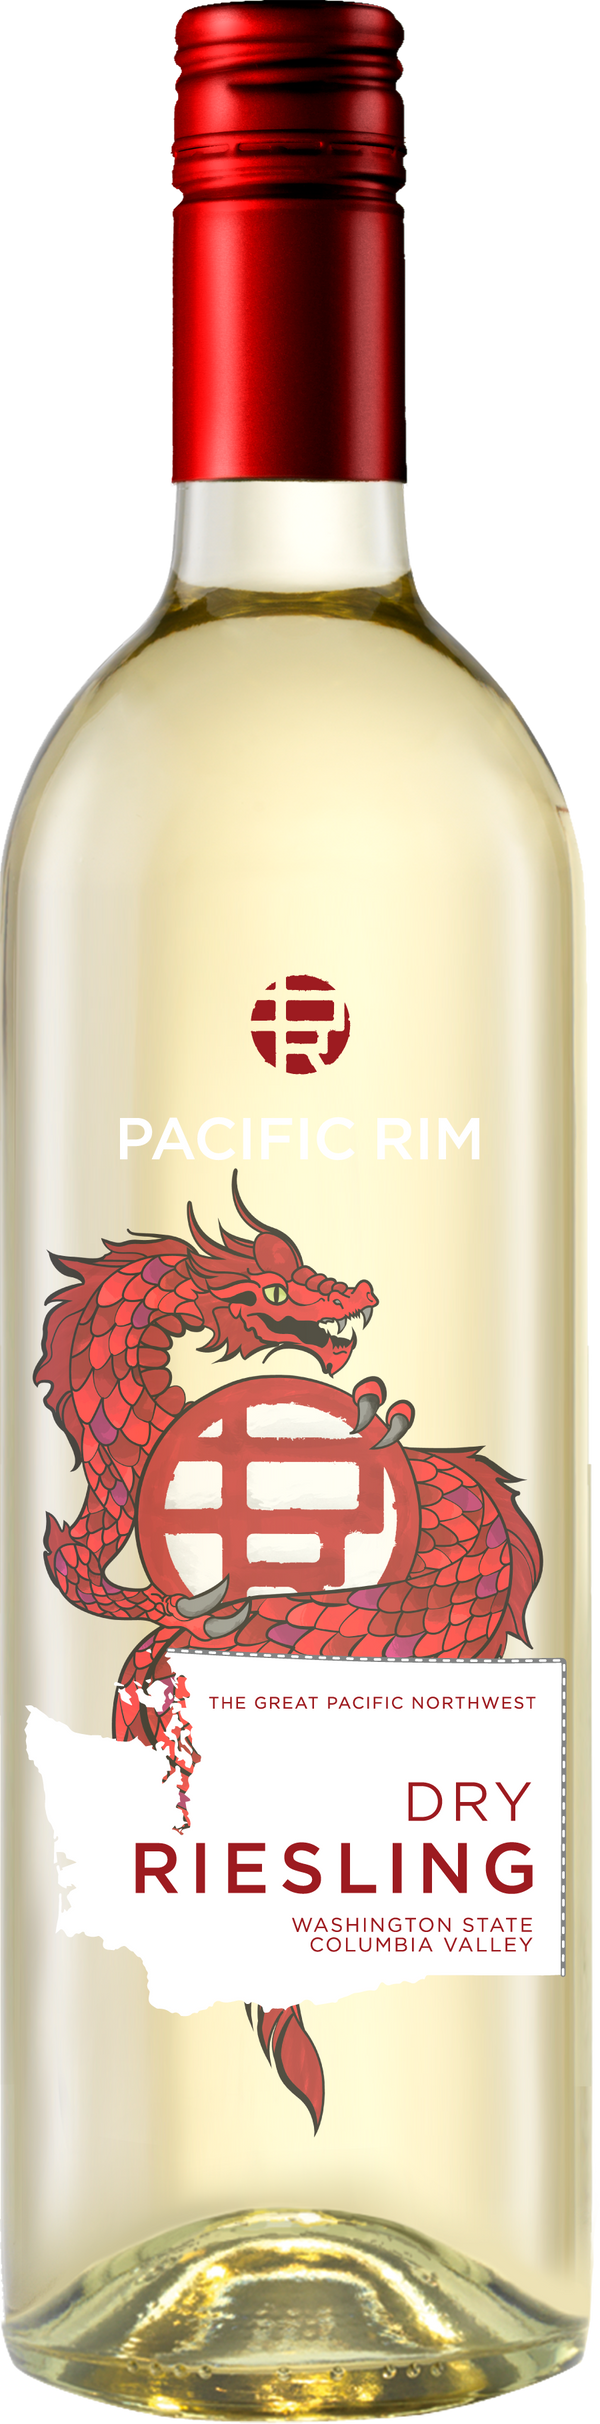 Pacific Rim Dry Riesling, Columbia Valley